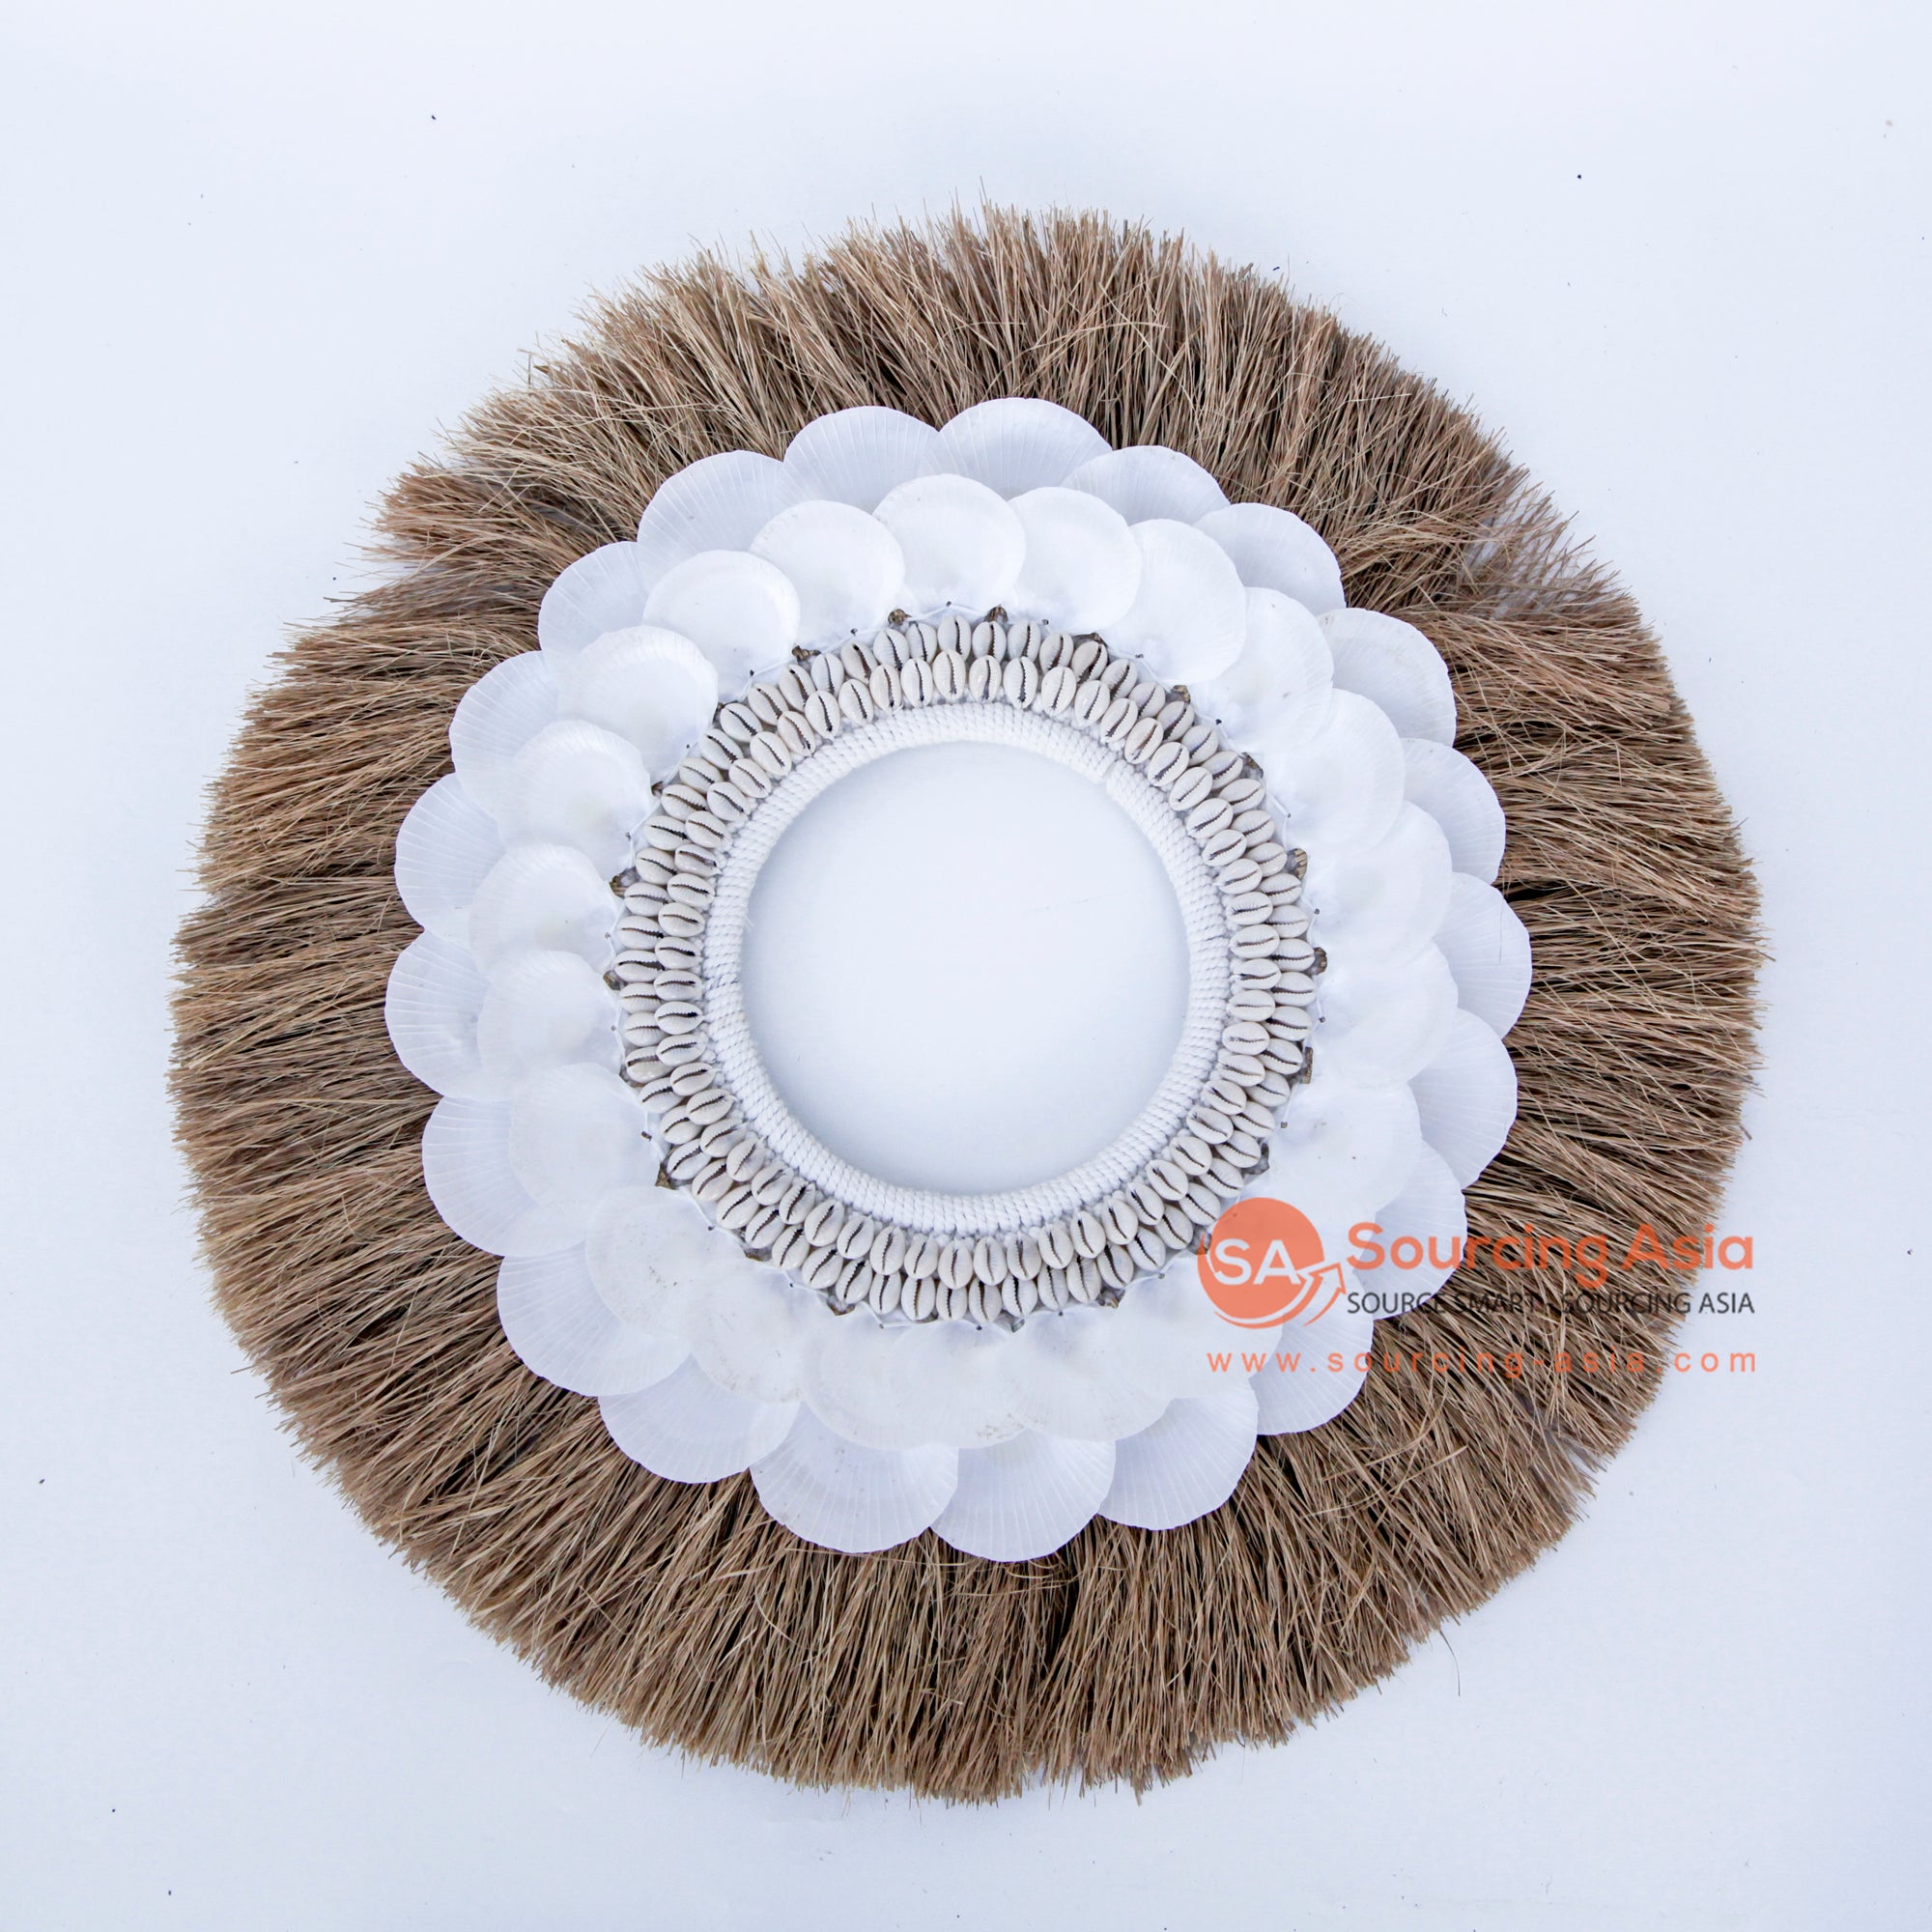 DHL038 NATURAL RAFFIA AND WHITE SHELL ROUND WALL DECORATION